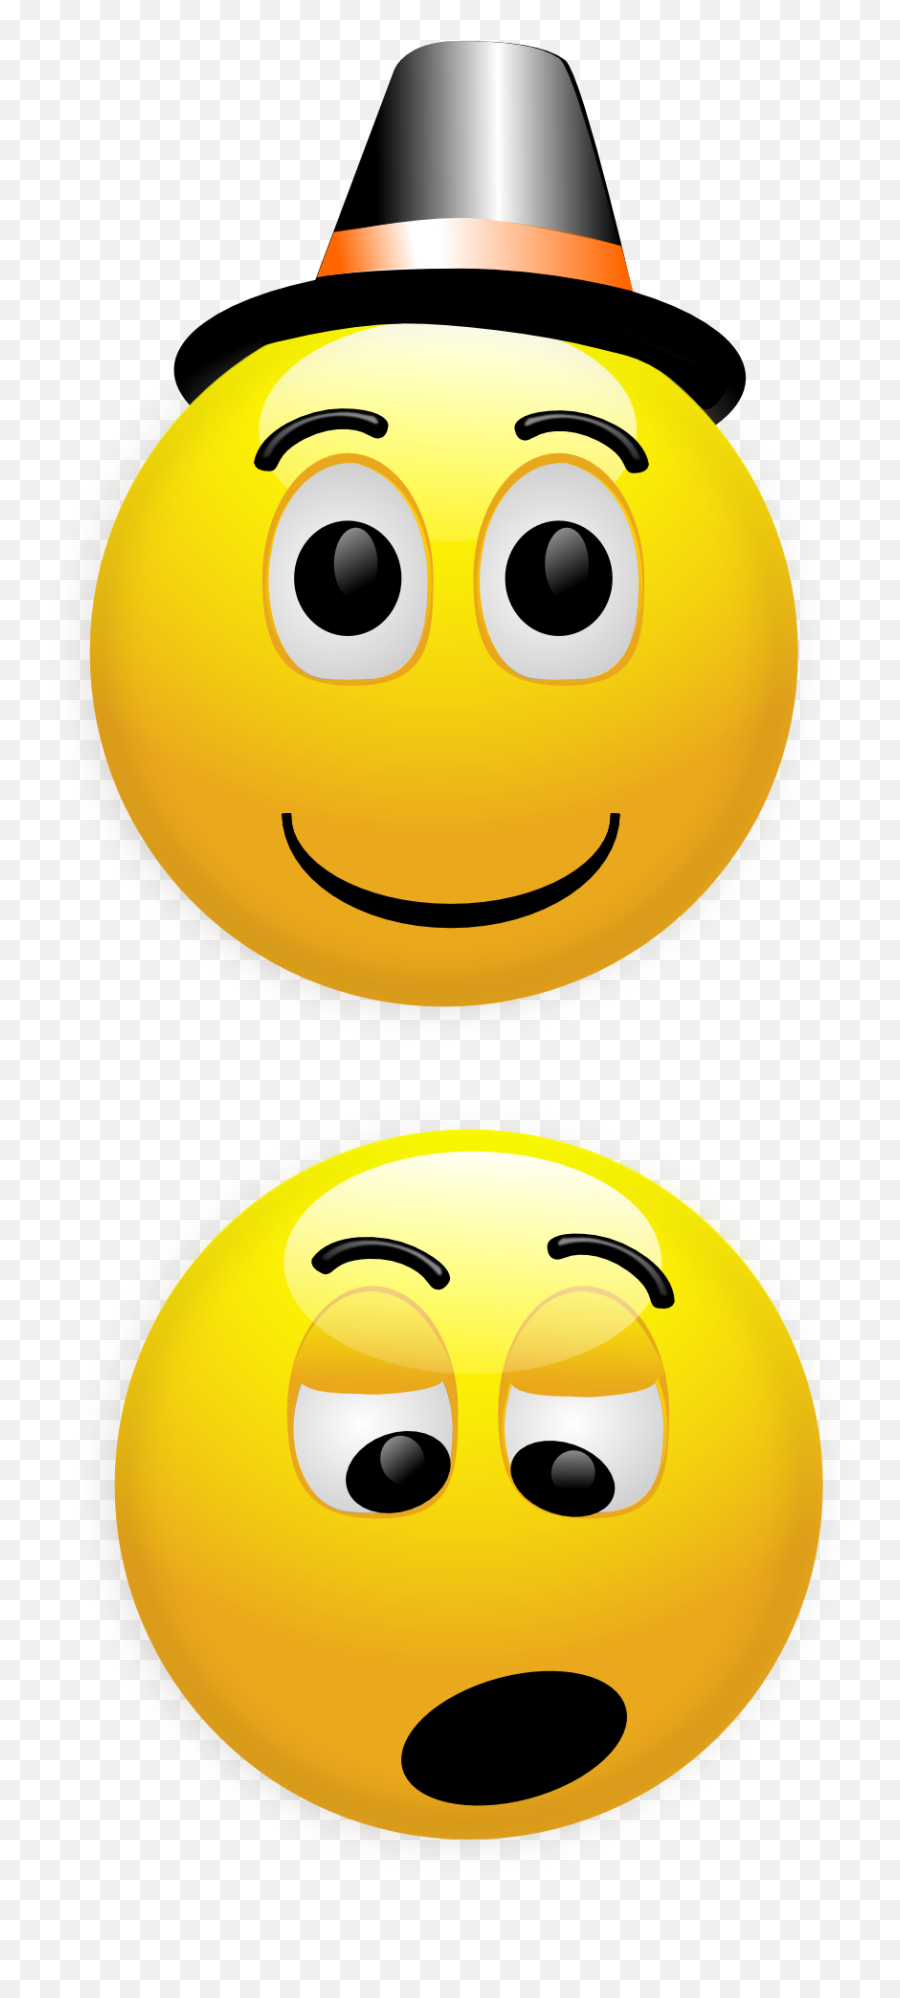 Black Hat Smiley And Surprised Smiley - Happy Smiley Emoji,Emoji With Tongue Out To The Side